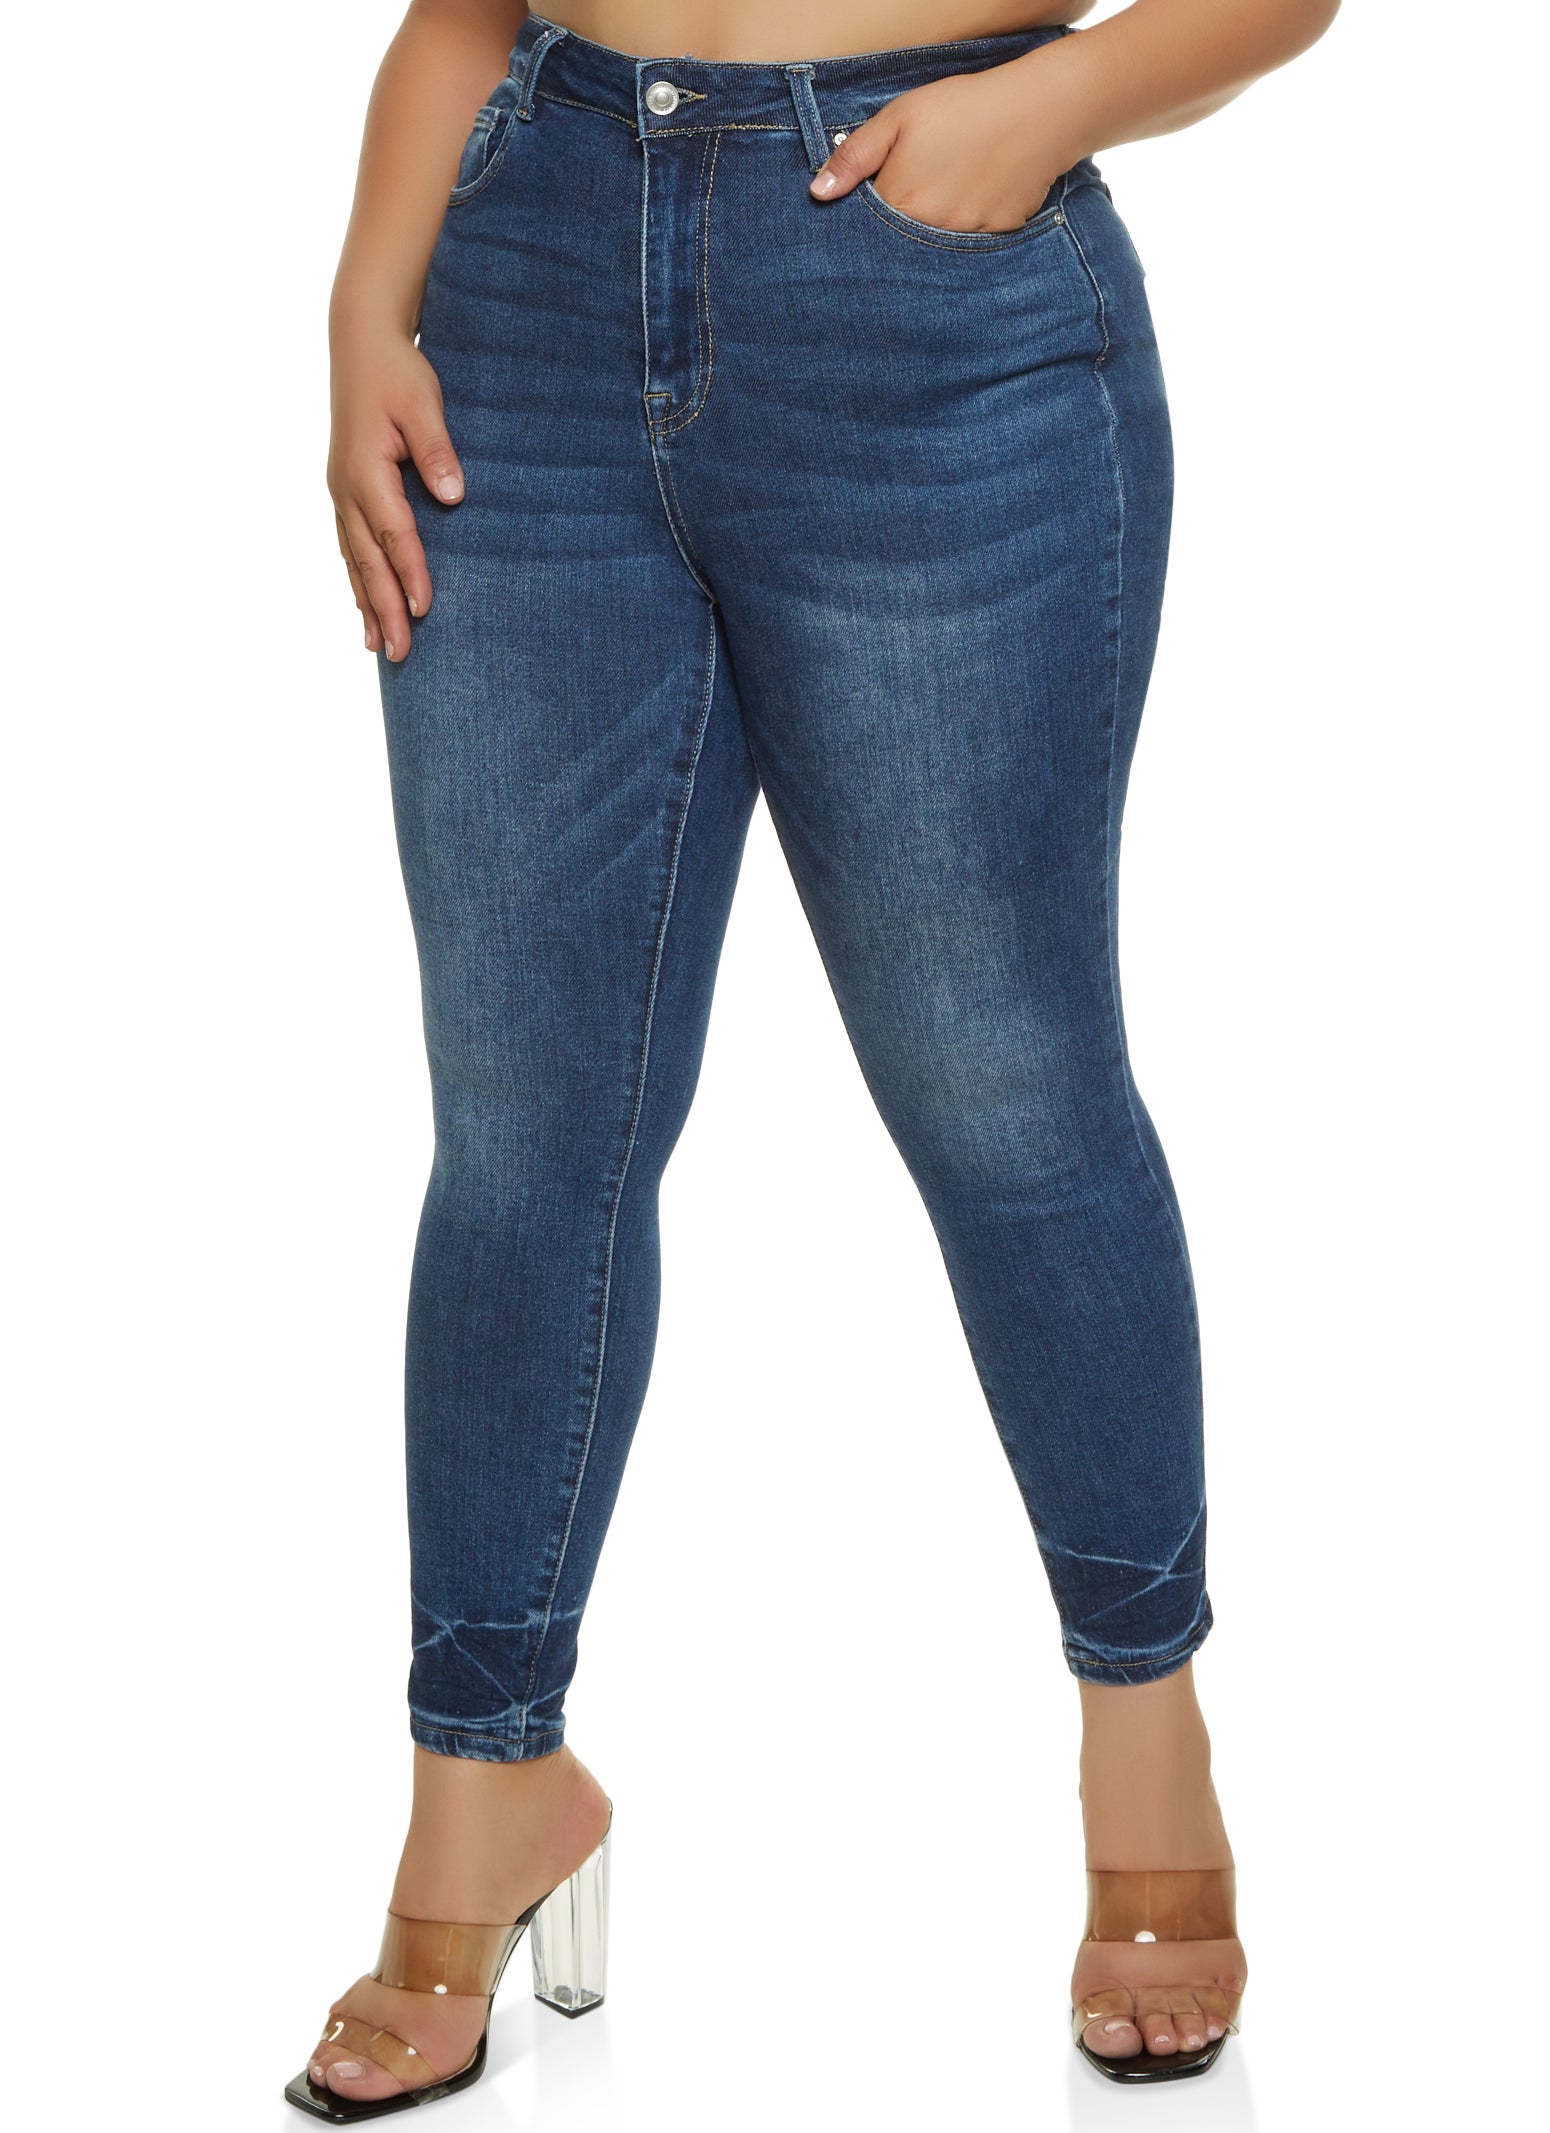 Plus Size WAX High Waisted Whiskered Skinny Jeans - Dark Wash